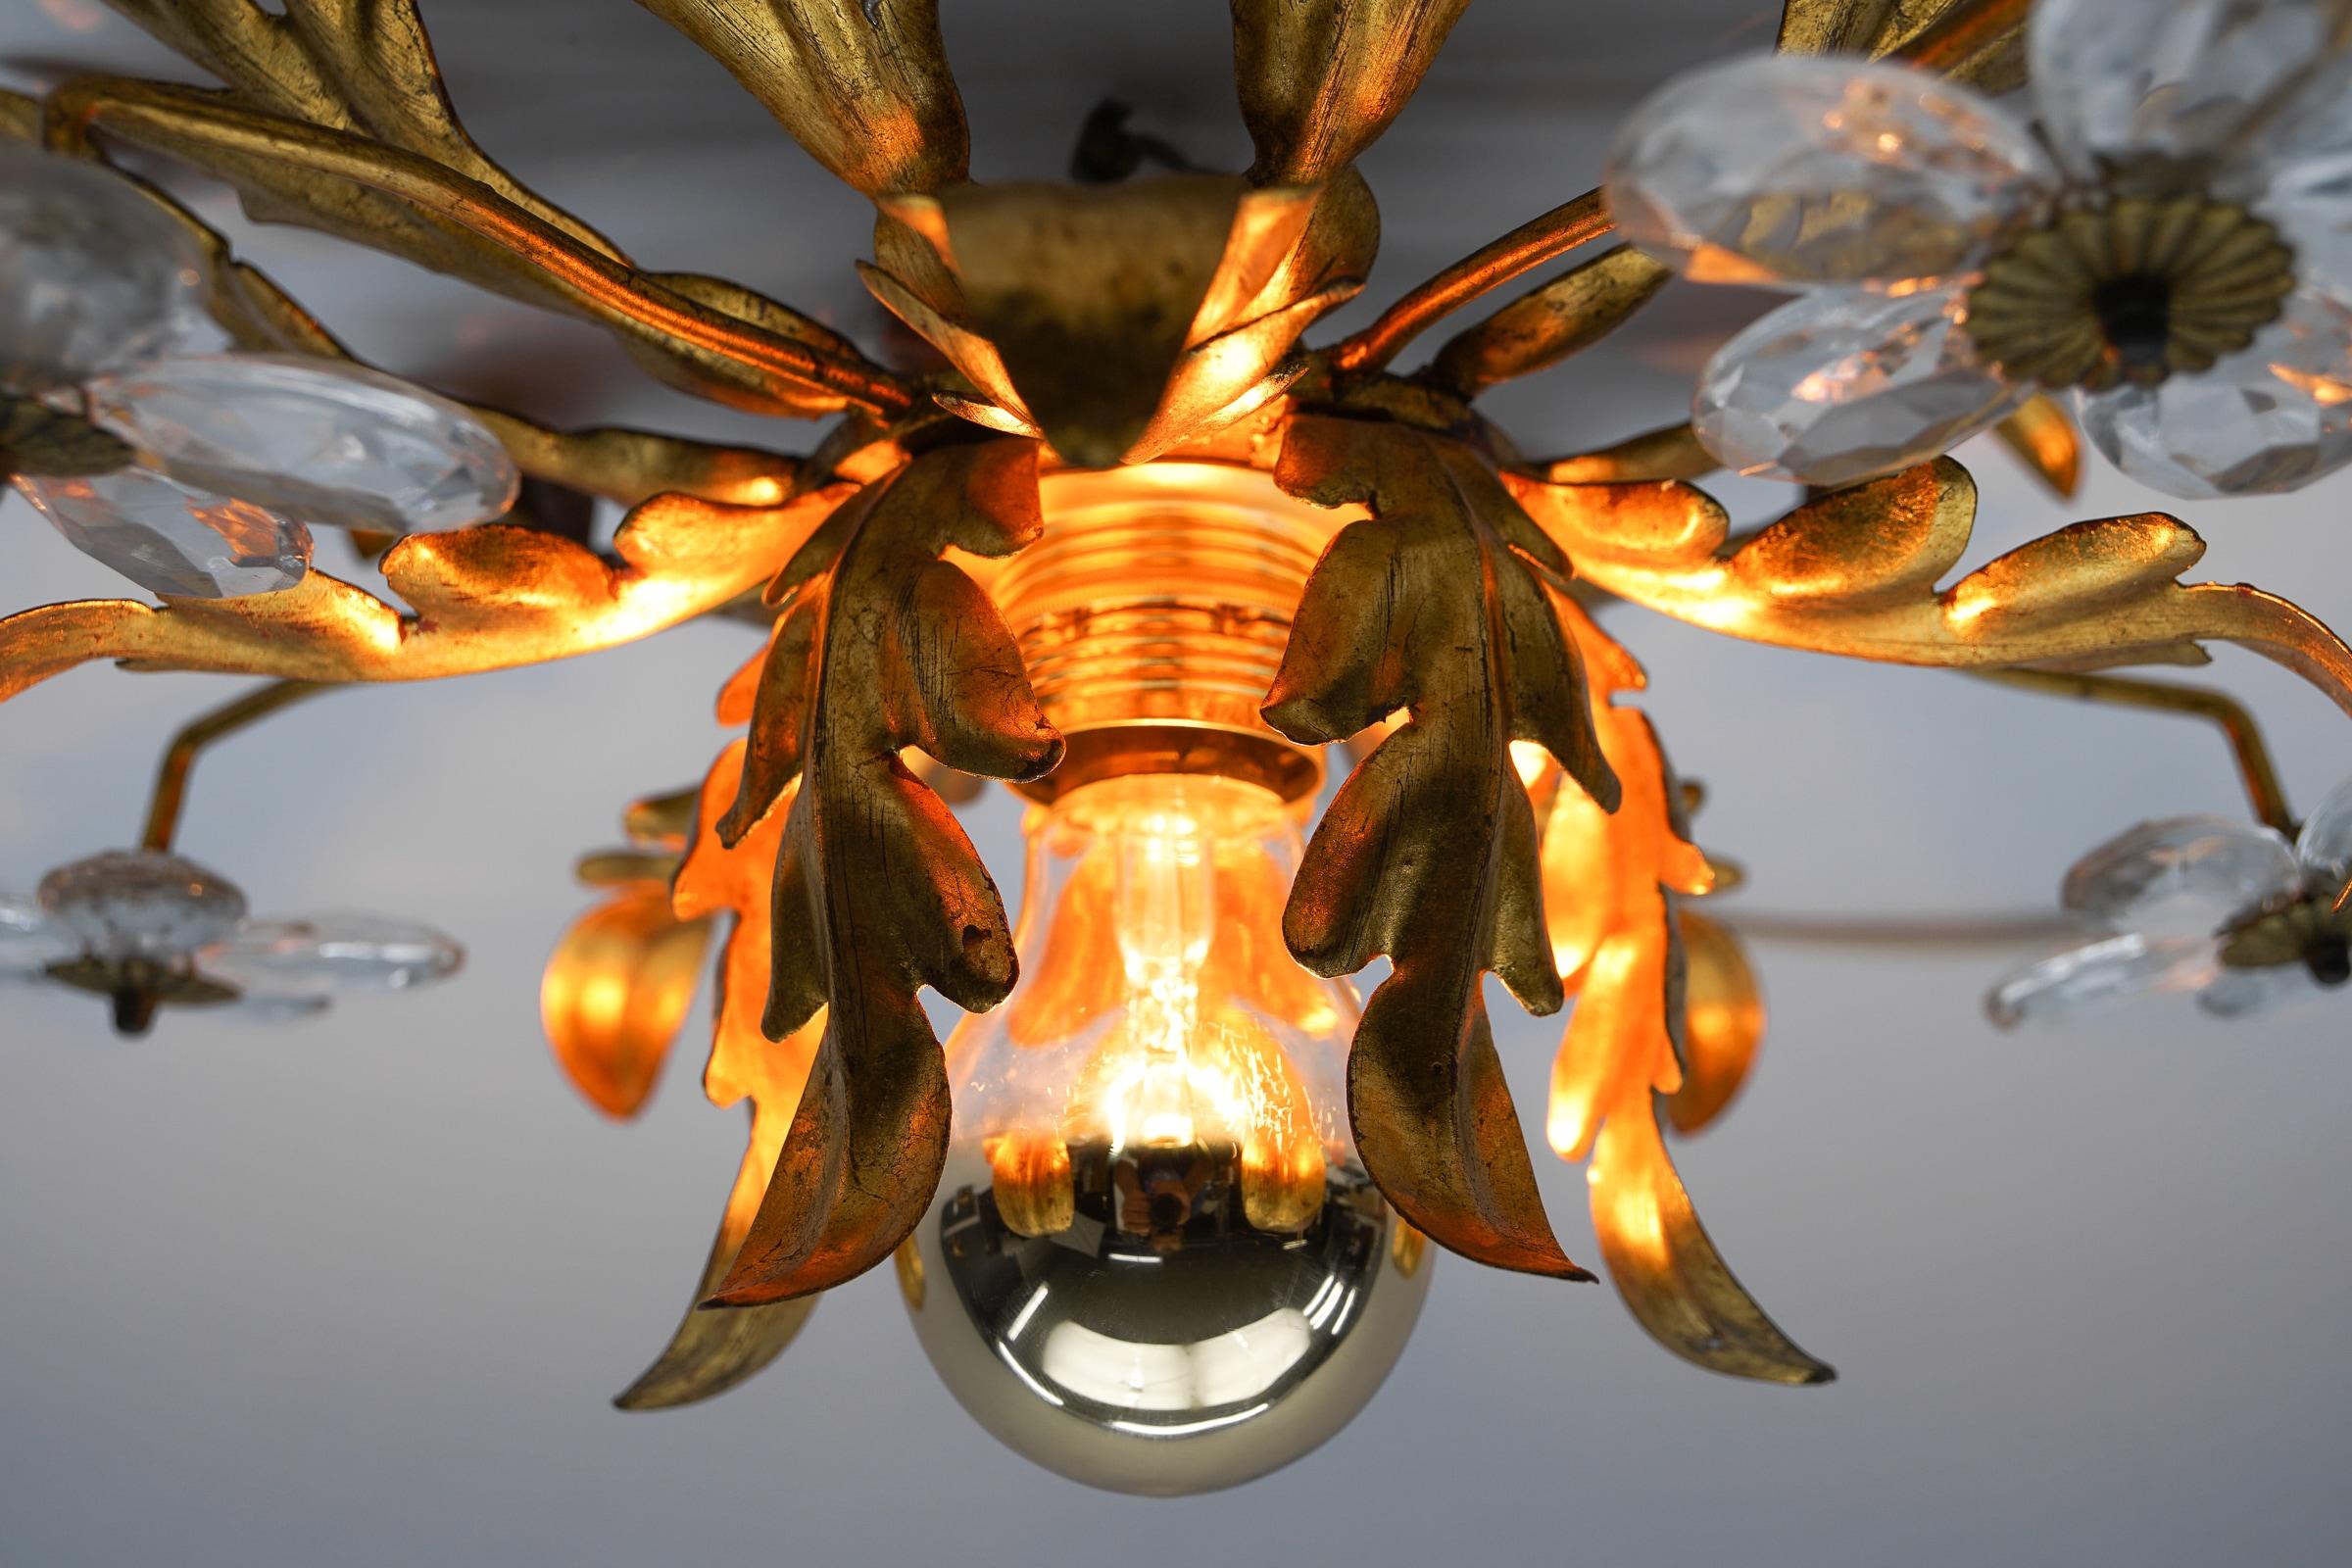 Crystal Glass and Metal Florentine Ceiling Lamp by Banci Firenze, 1960s For Sale 1